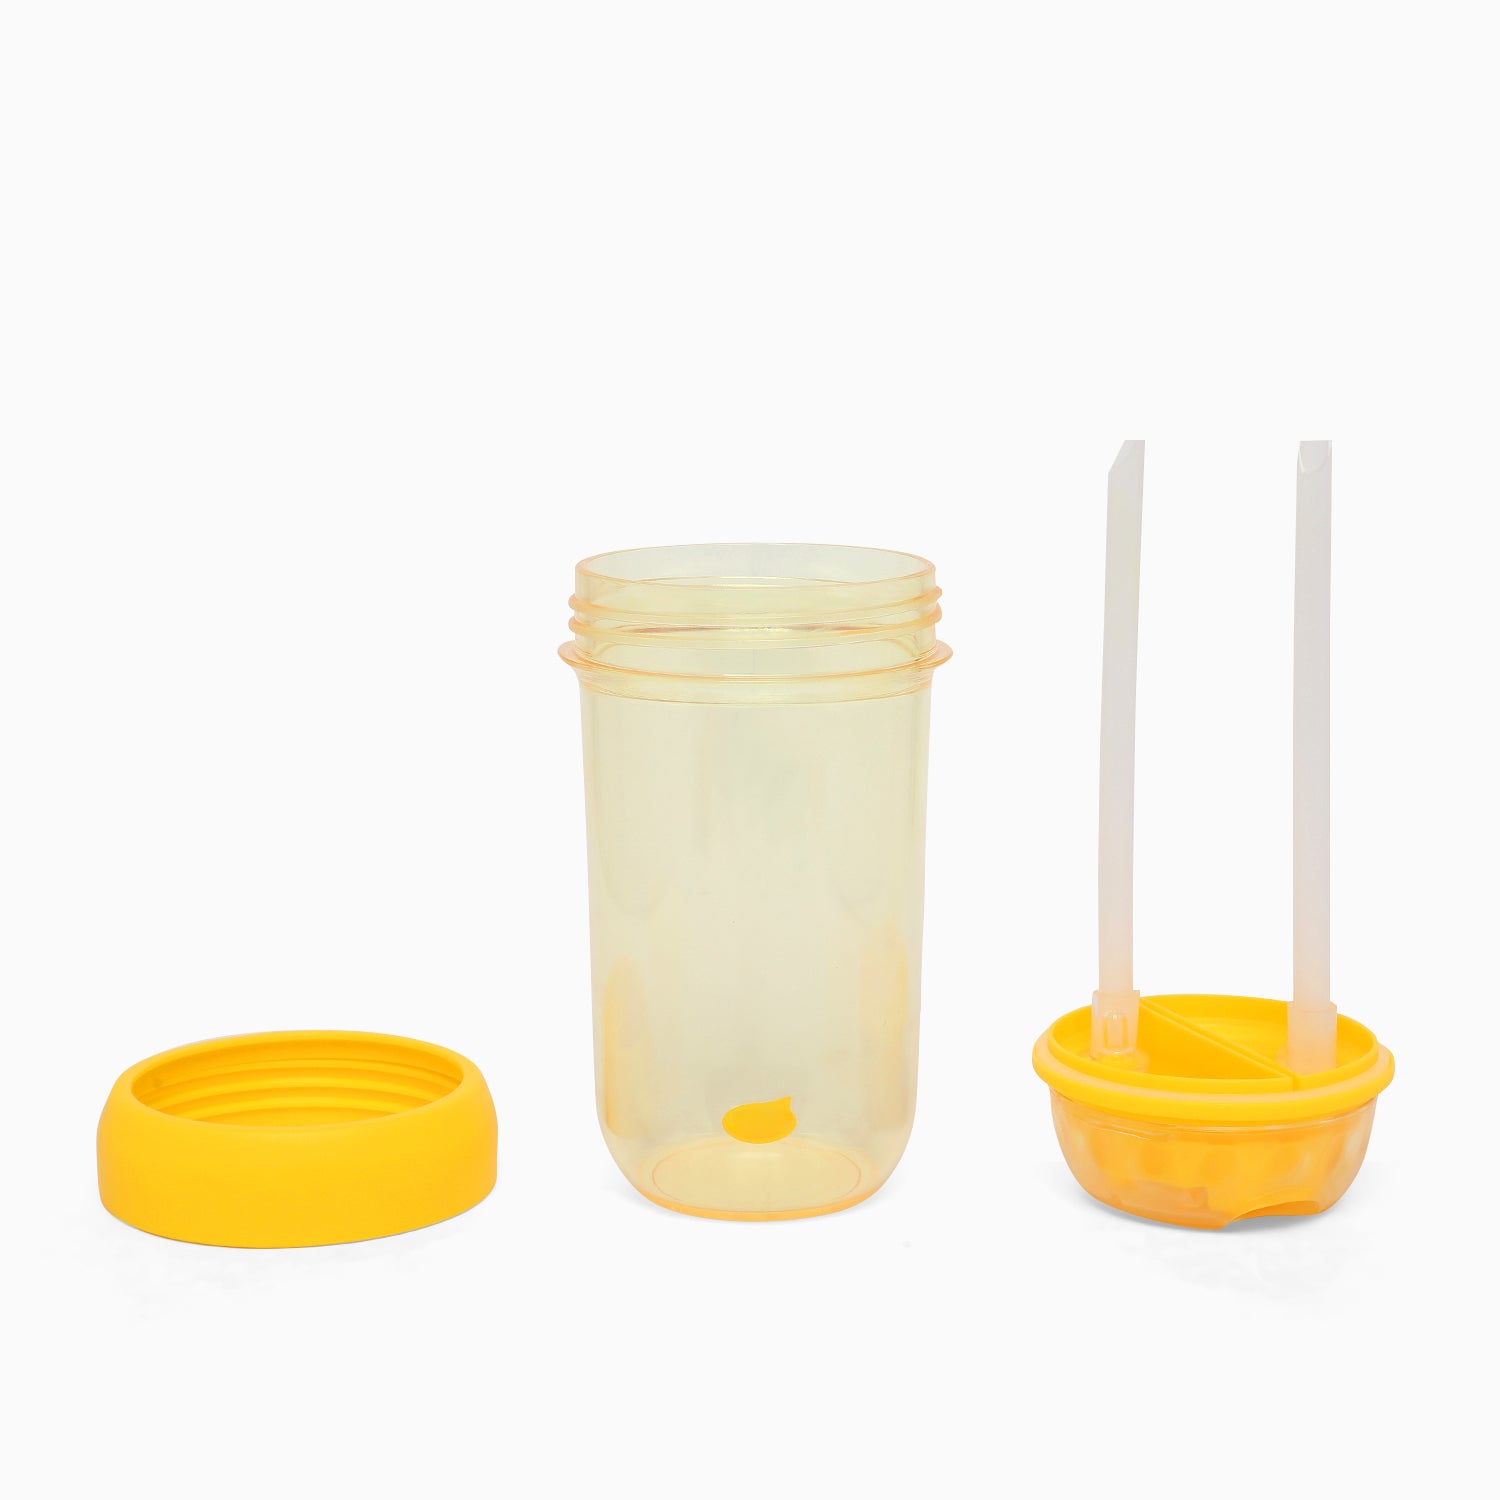 Dual sipper with strap slide to open bottle -560 mL (yellow) - Kidspark